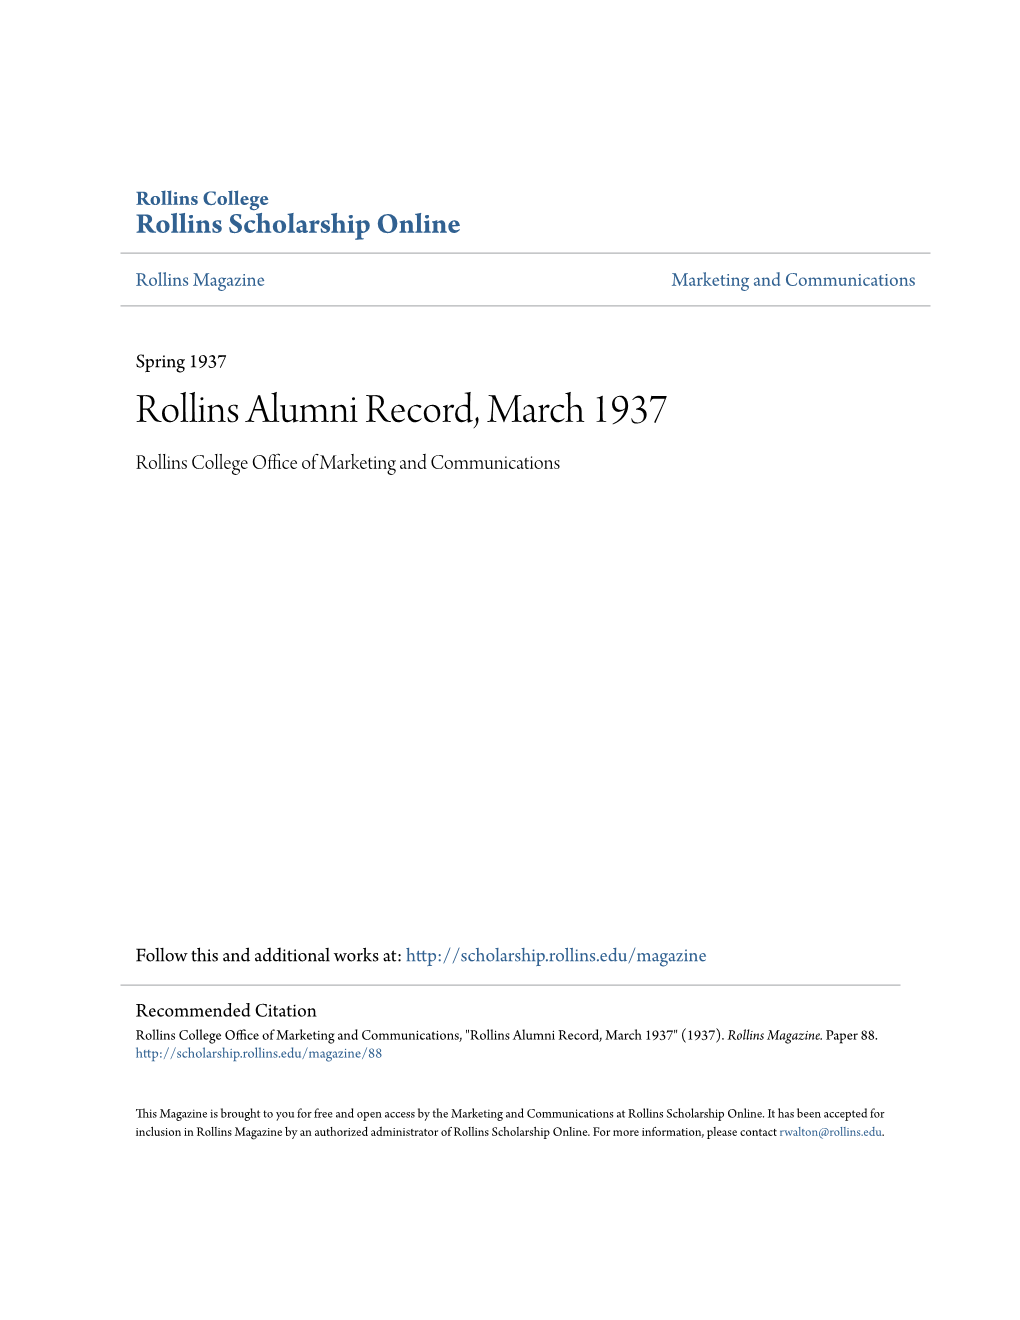 Rollins Alumni Record, March 1937 Rollins College Office Ofa M Rketing and Communications